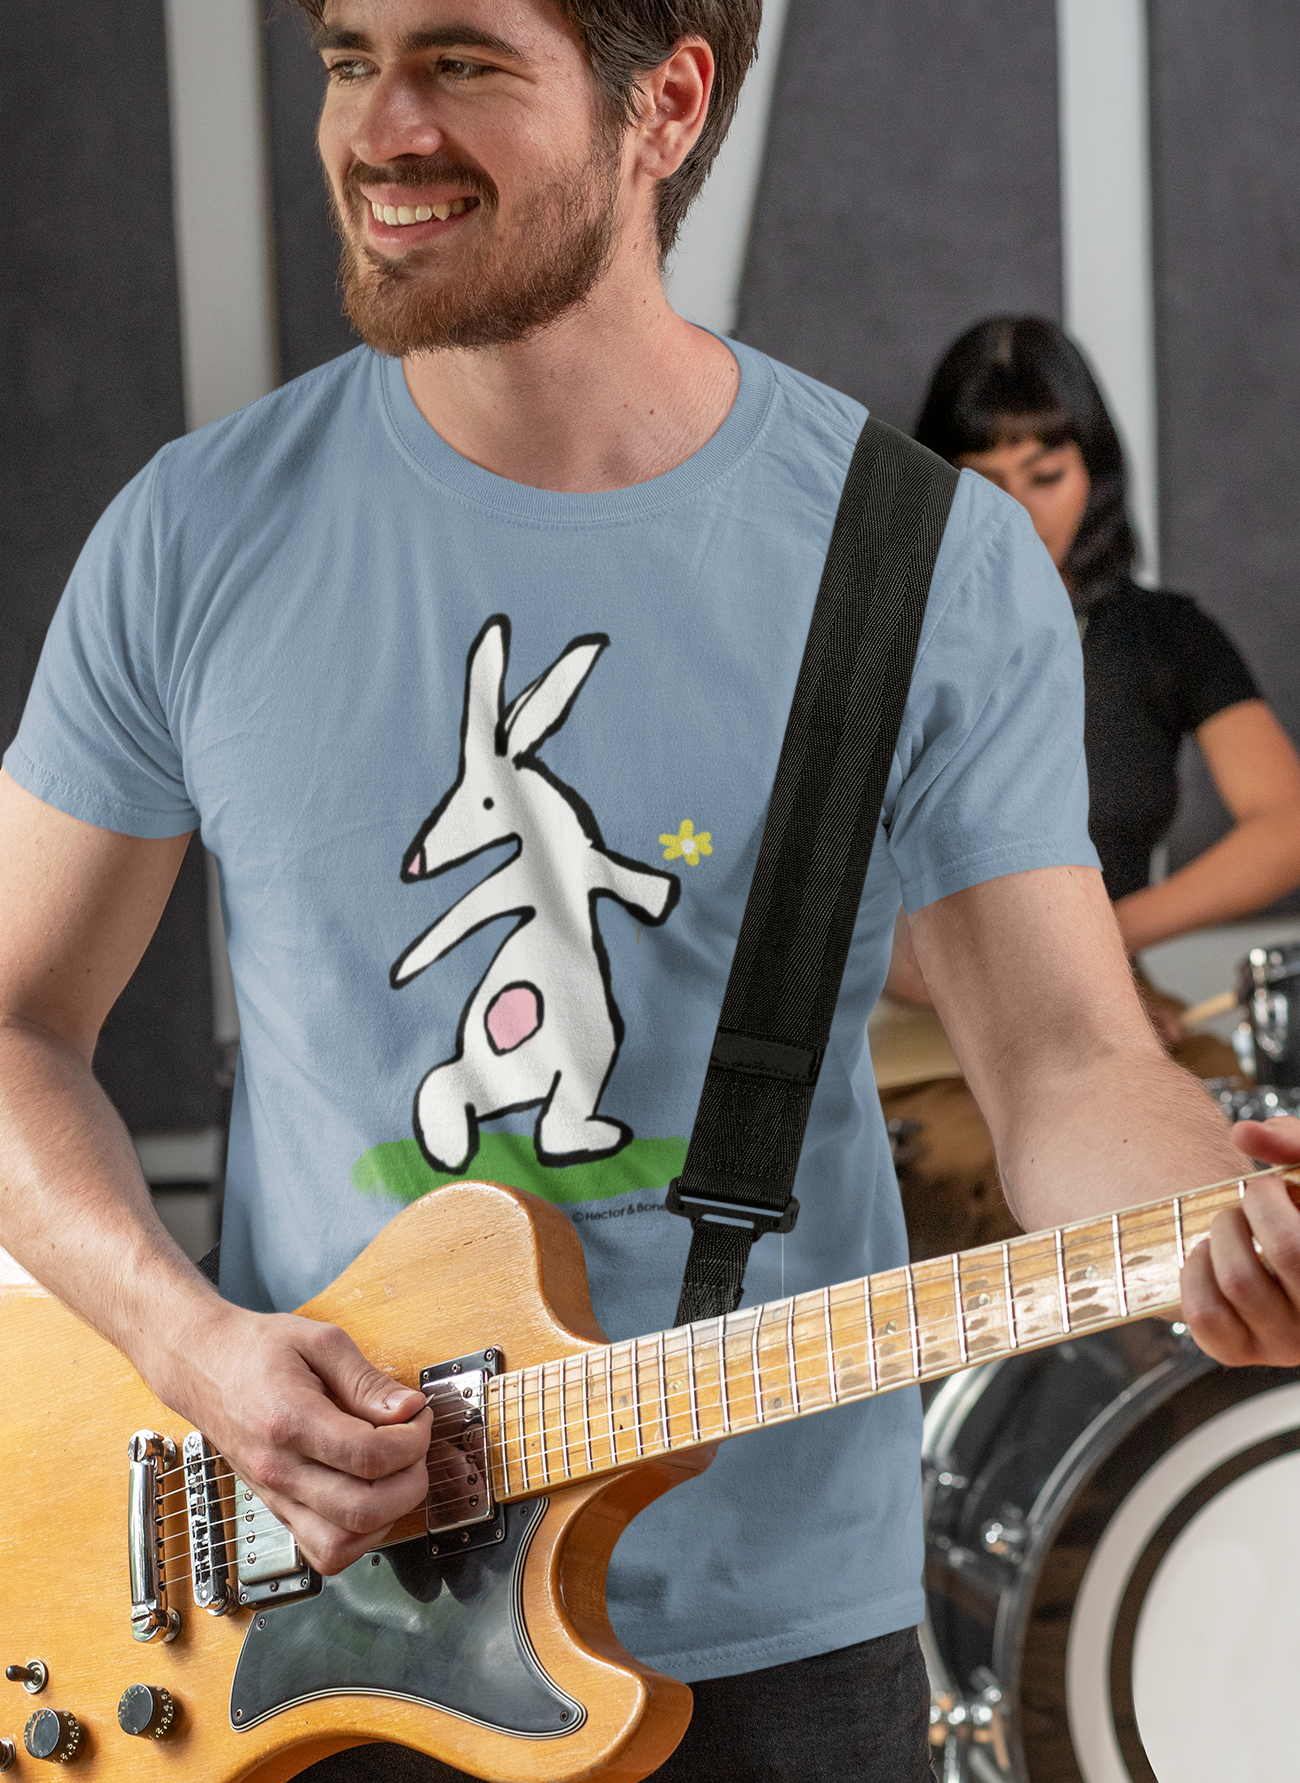 Bunny T-shirt - Guitarist man wearing Illustrated bunny rabbit holding a flower design on a mid heather blue vegan cotton t-shirt - Easter Bunny t-shirts by Hector and Bone